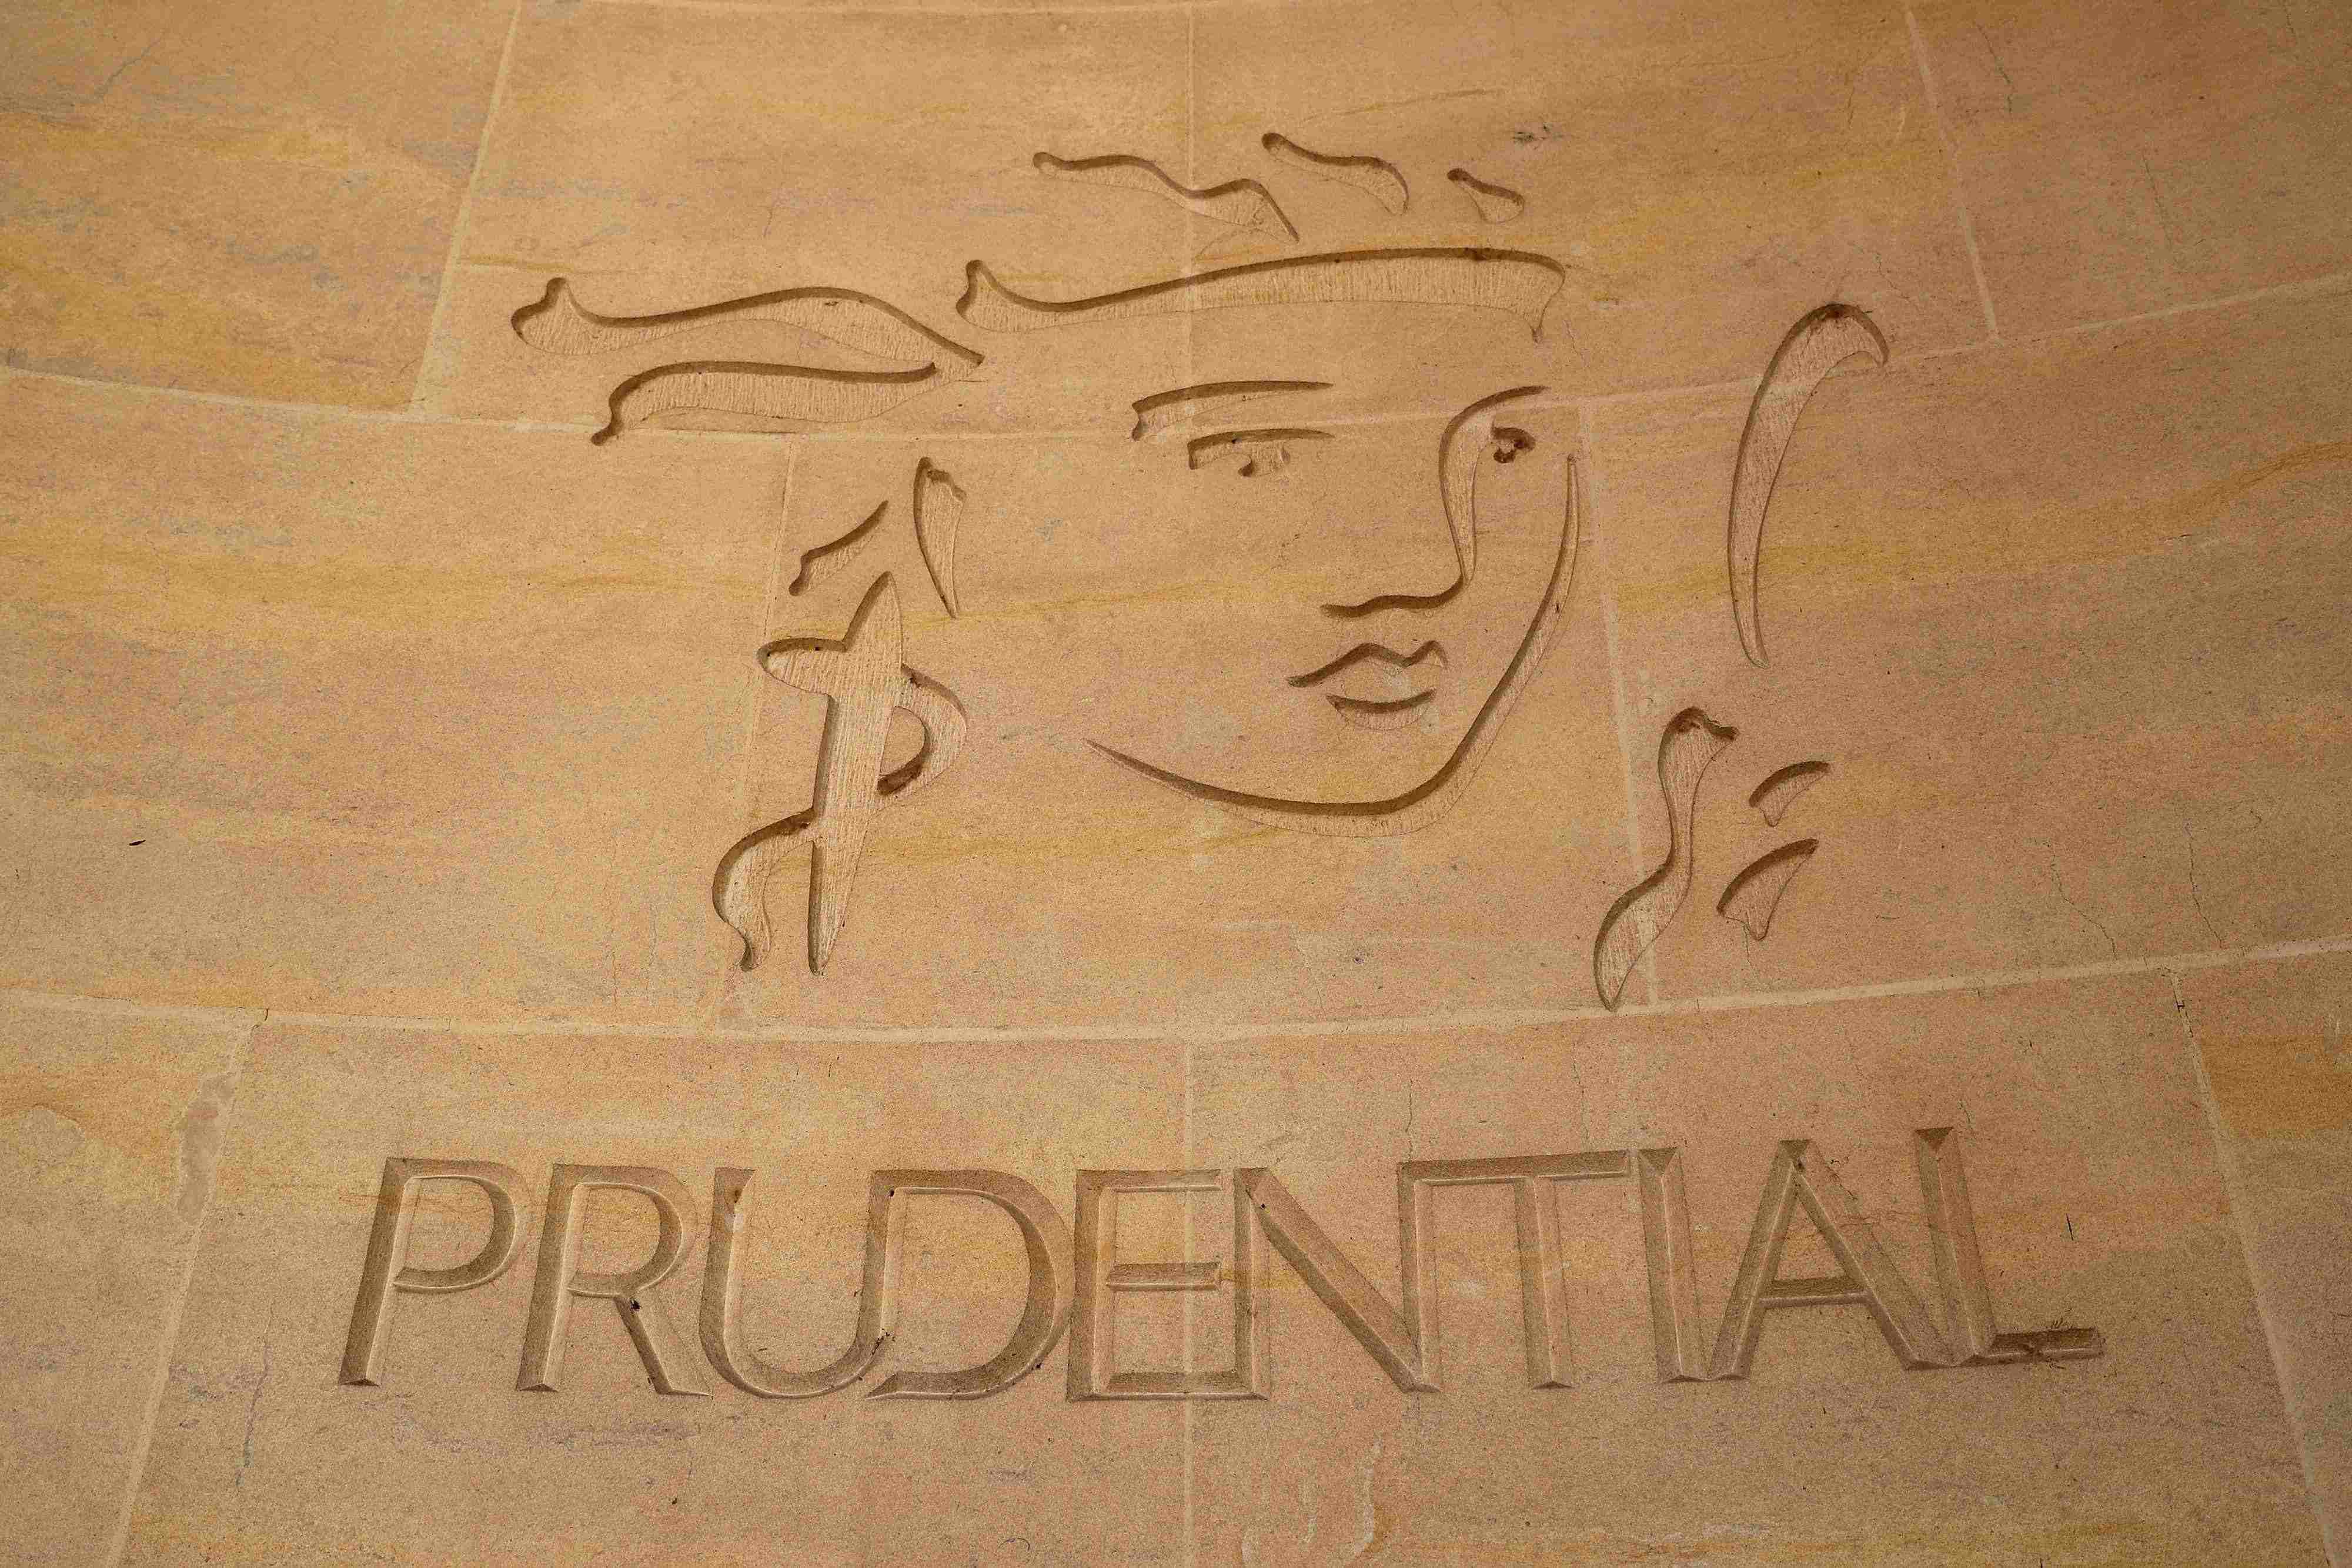 13-facts-about-prudential